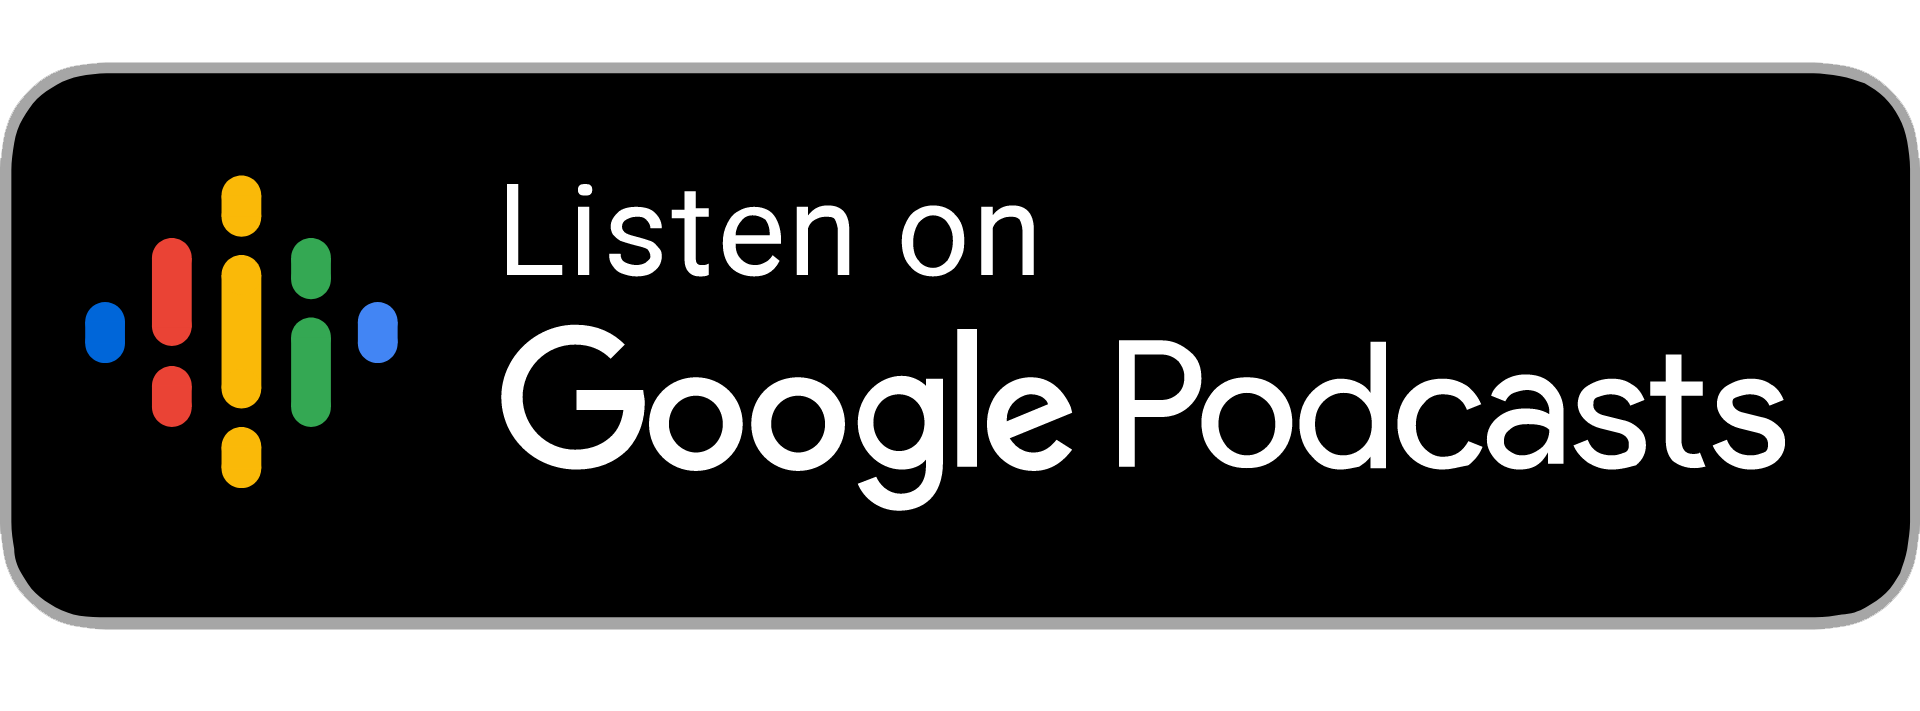 Google Podcasts button